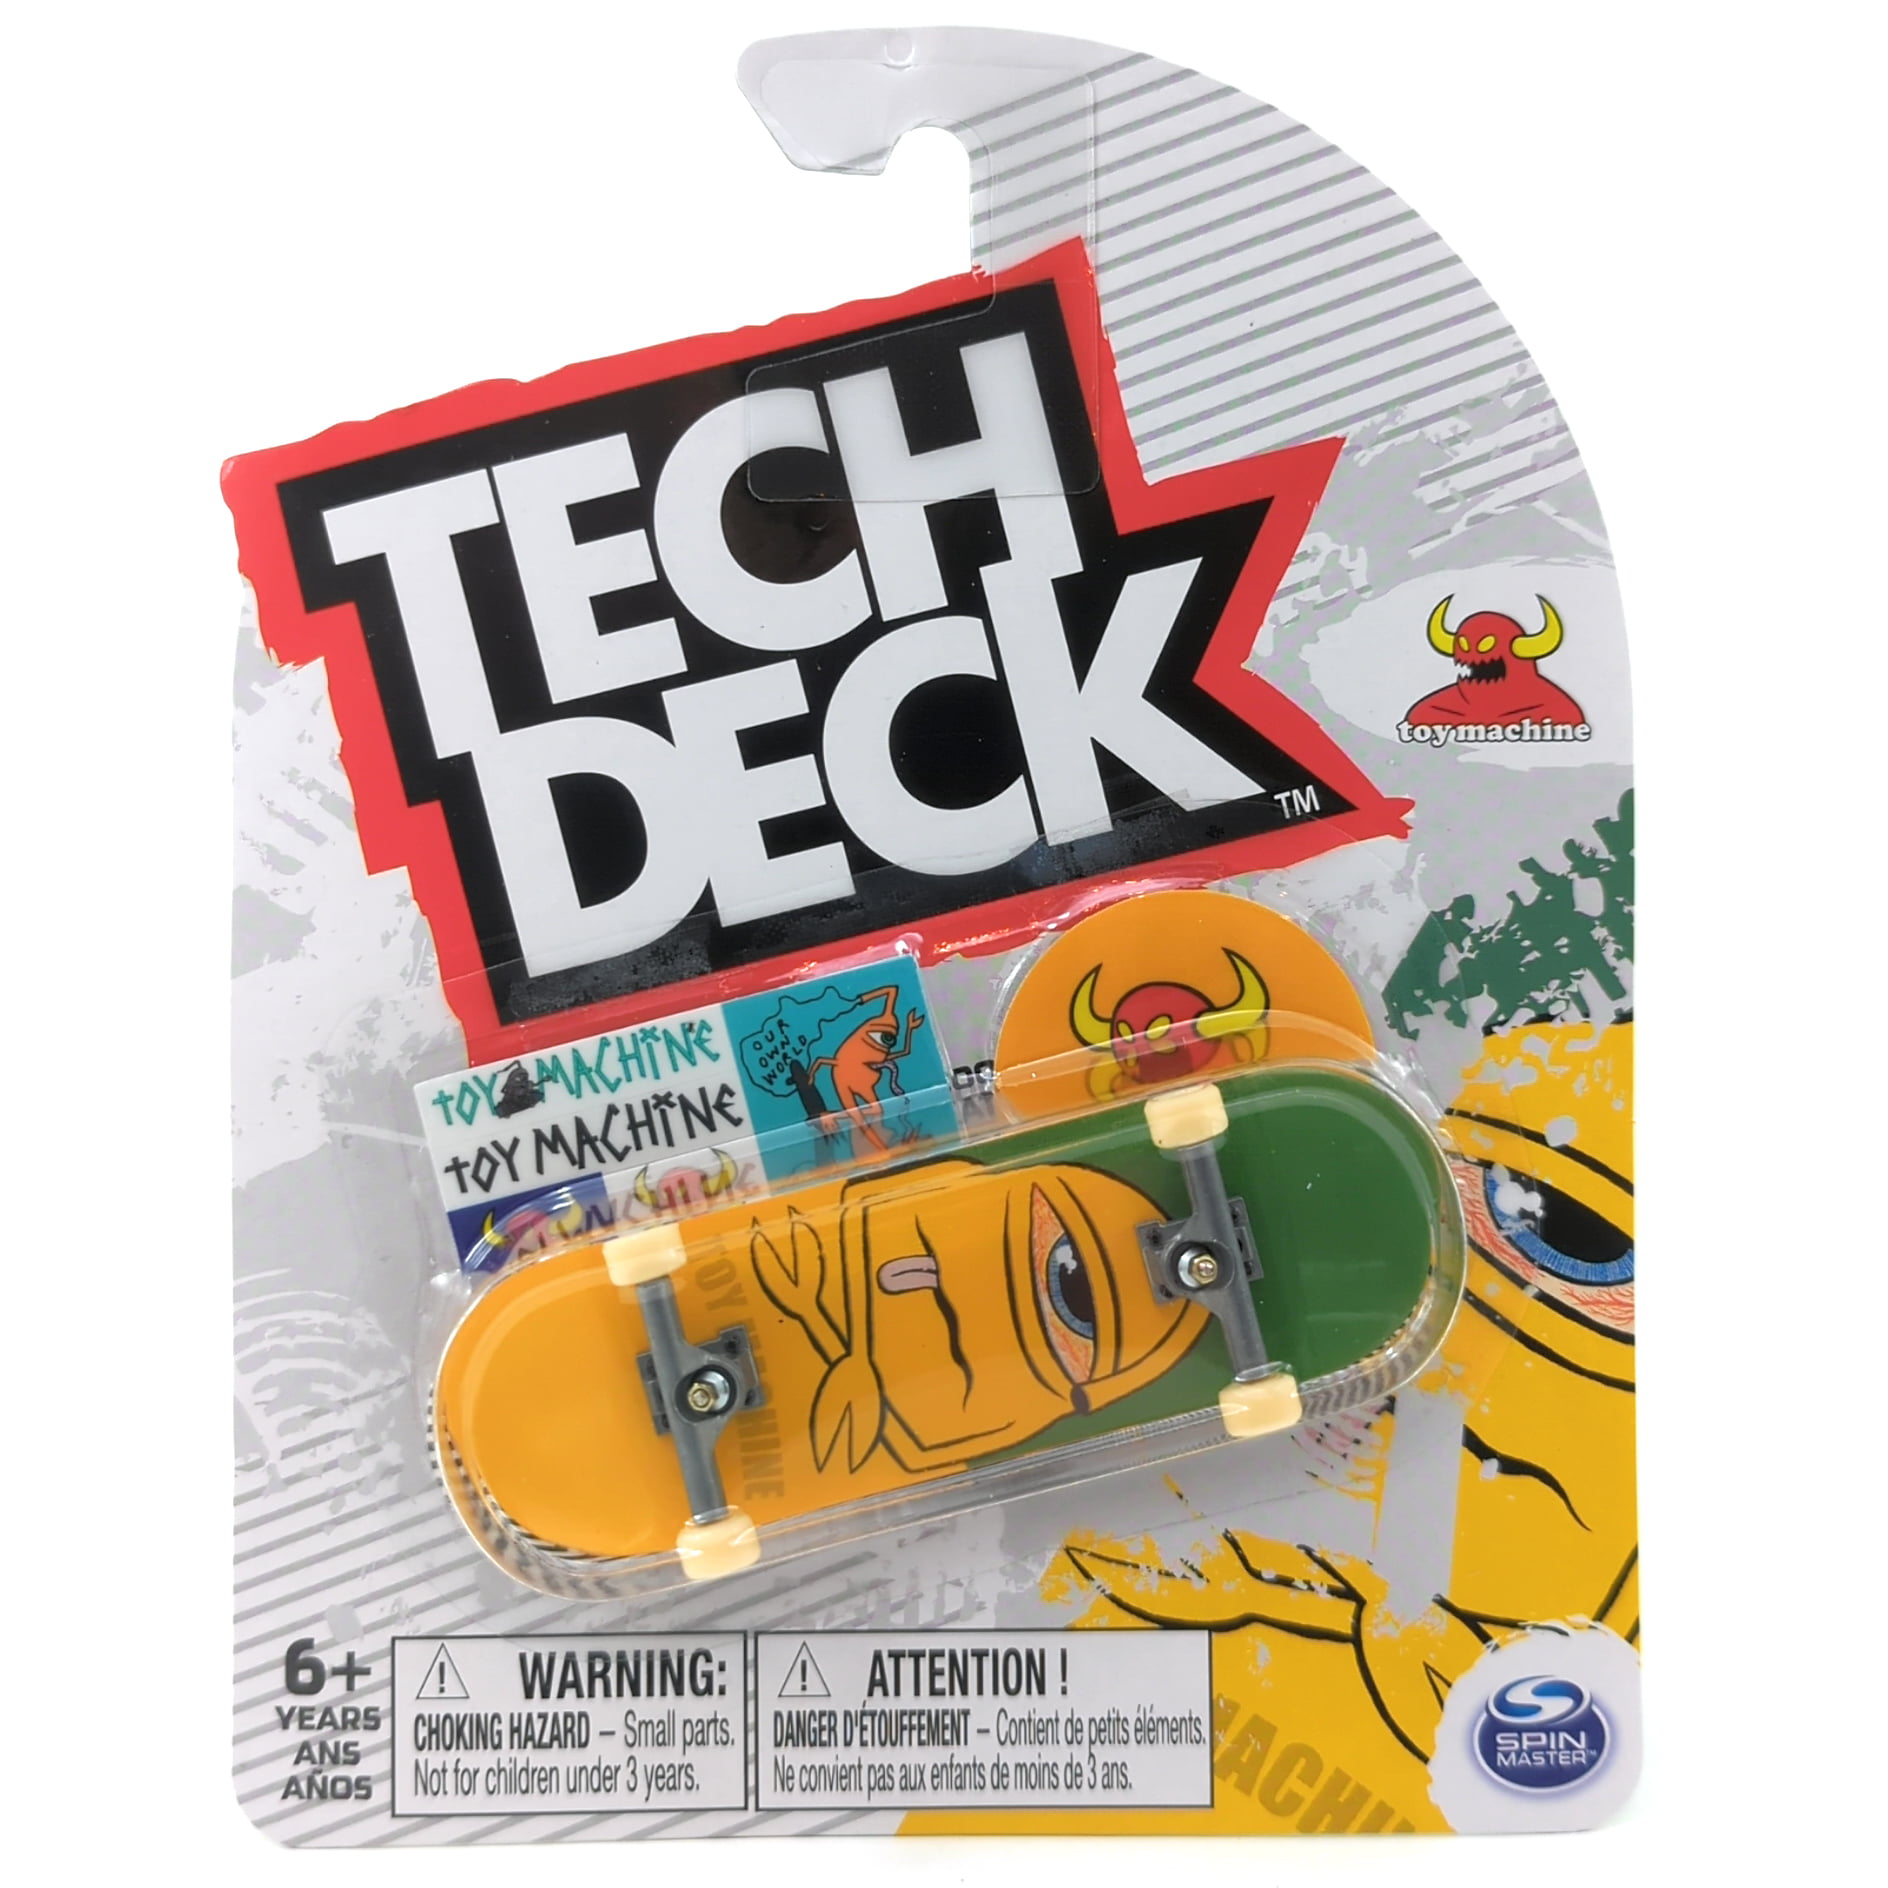 Details about   ONE OF A KIND Tech Deck BIRDHOUSE 96mm Fingerboard New in Box 